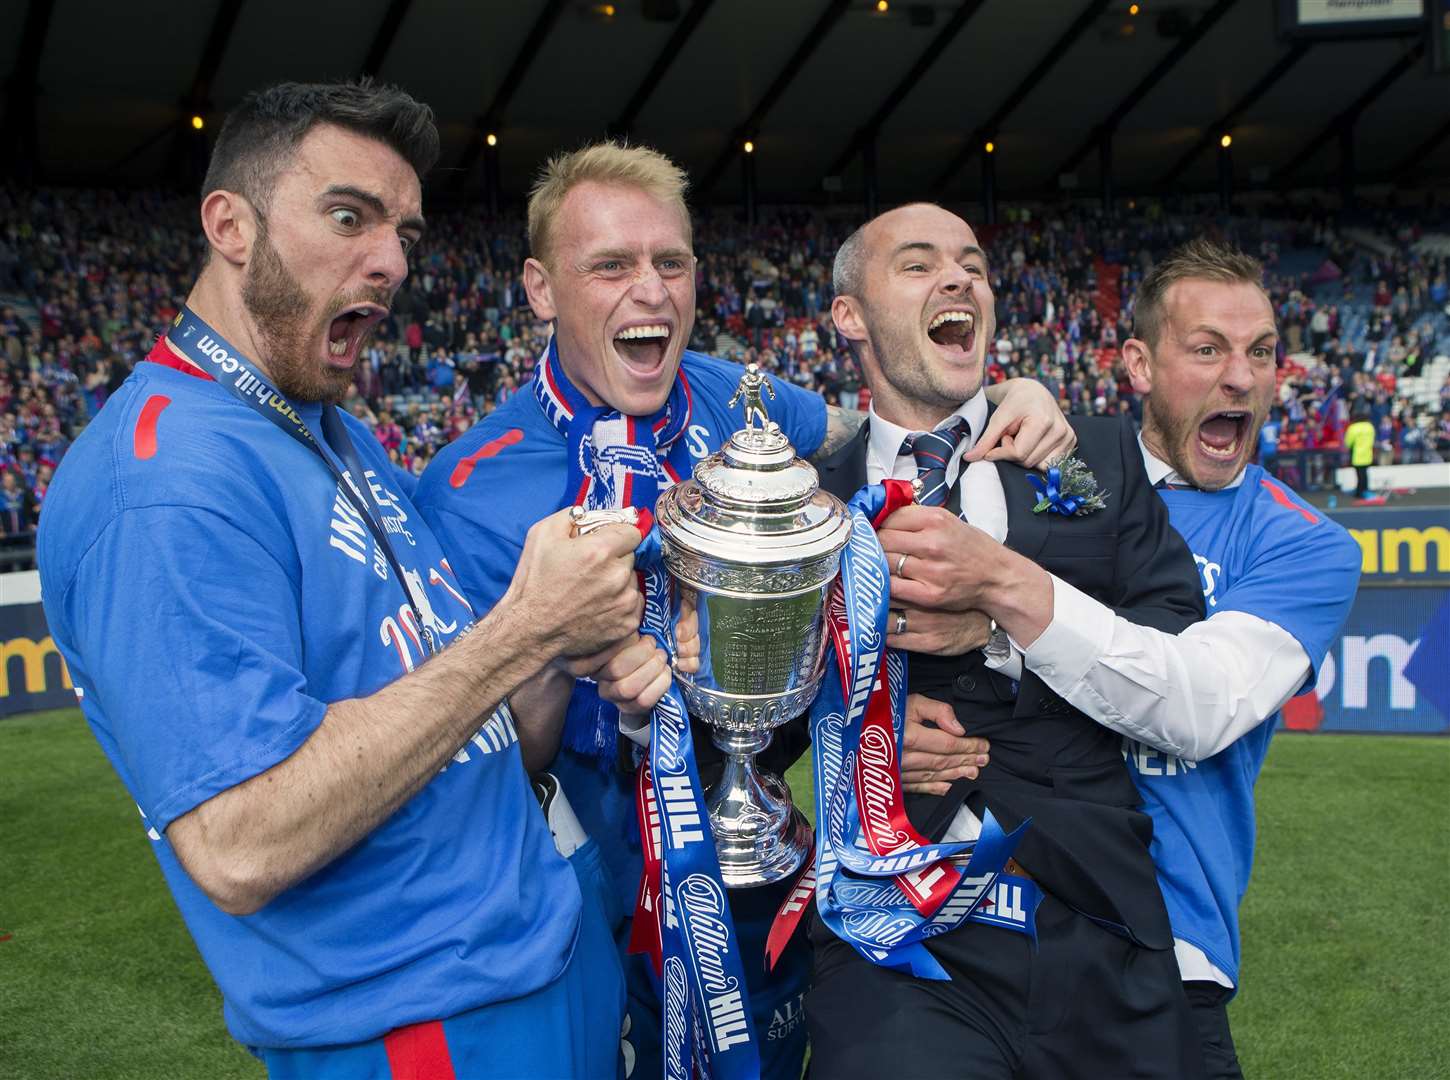 Picture - Ken Macpherson, Inverness. Scottish Cup Final. Inverness CT(2) v Falkirk(1). 30.05.15. ICT's Ross Draper joined Carl Tremarco, David Raven, and Gary Warren with the Cup.